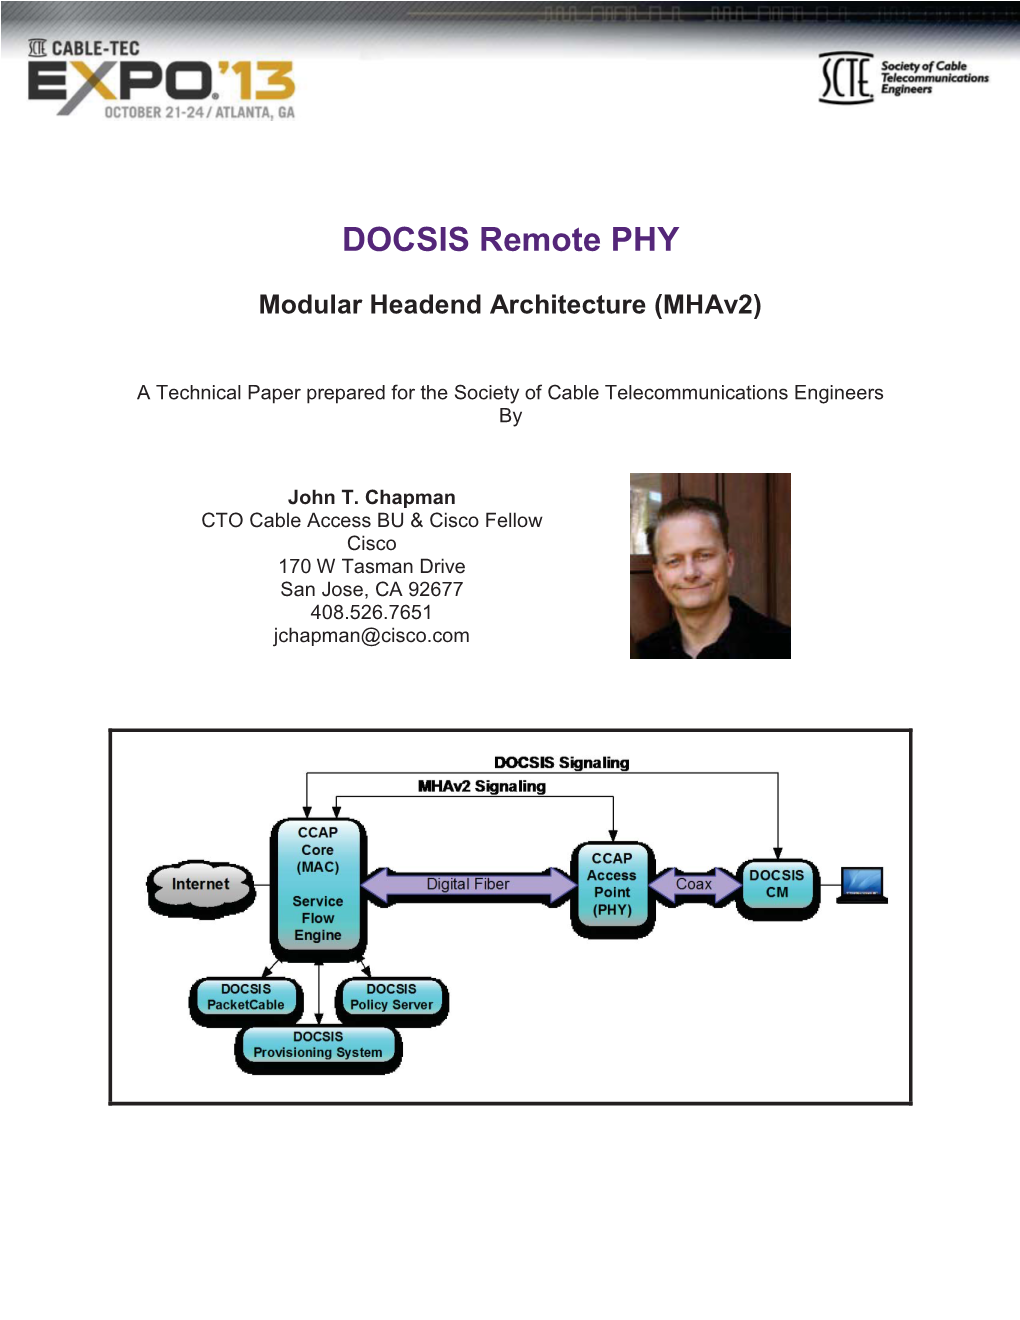 DOCSIS Remote PHY